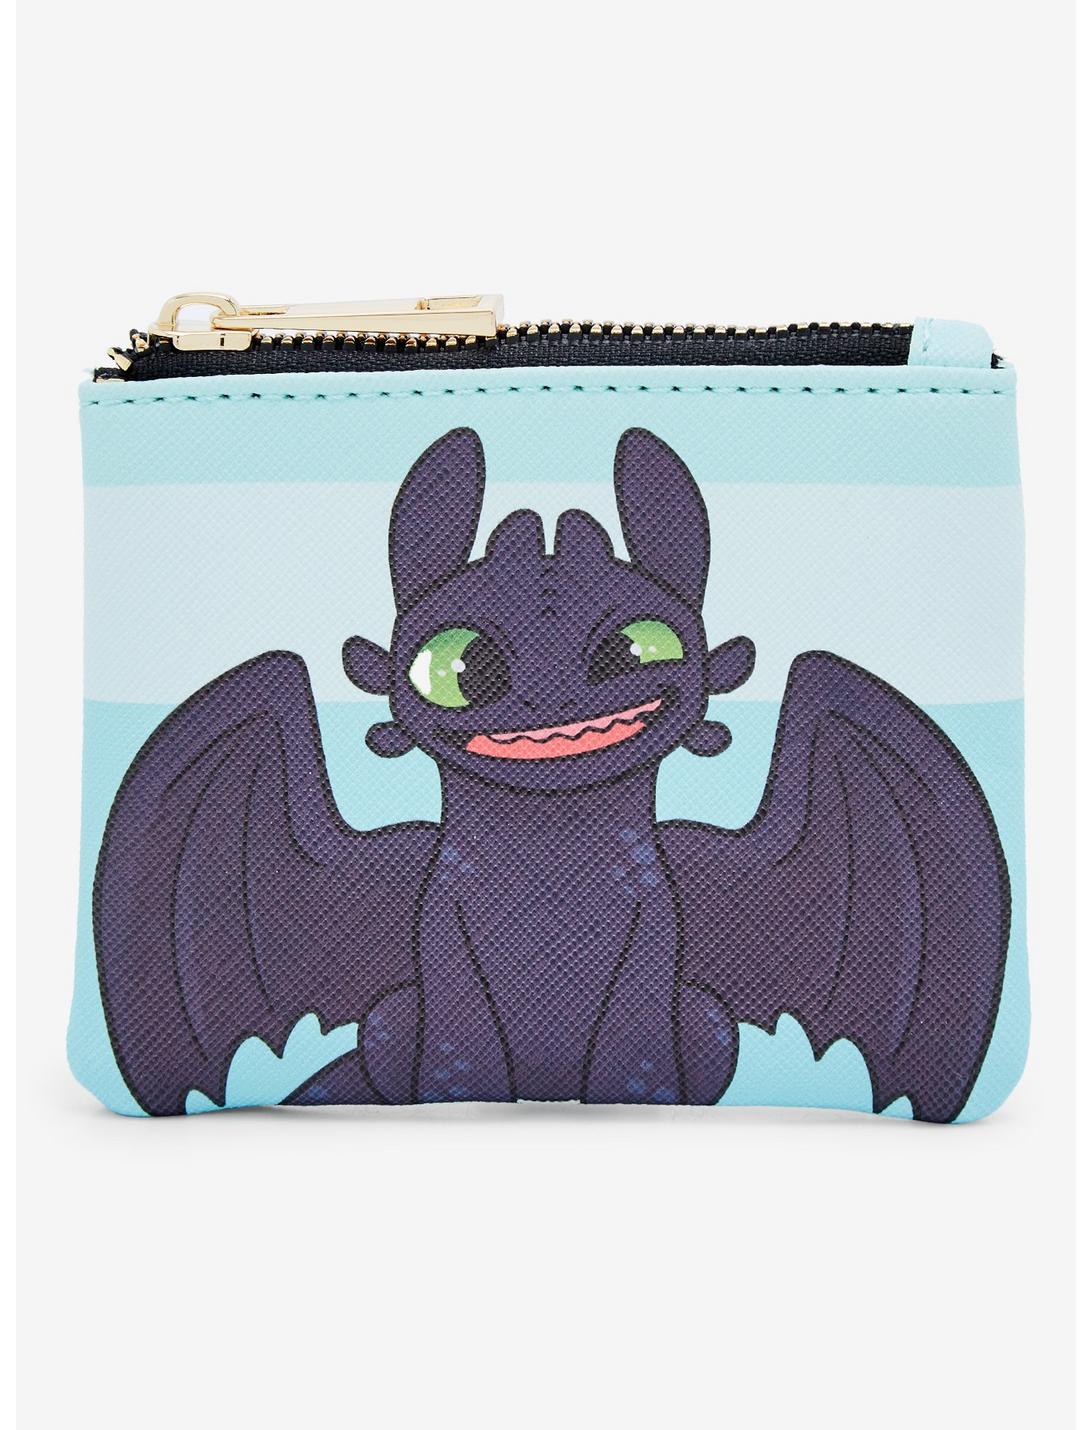 How to Train Your Dragon Toothless Smile Coin Purse - BoxLunch Exclusive |  BoxLunch